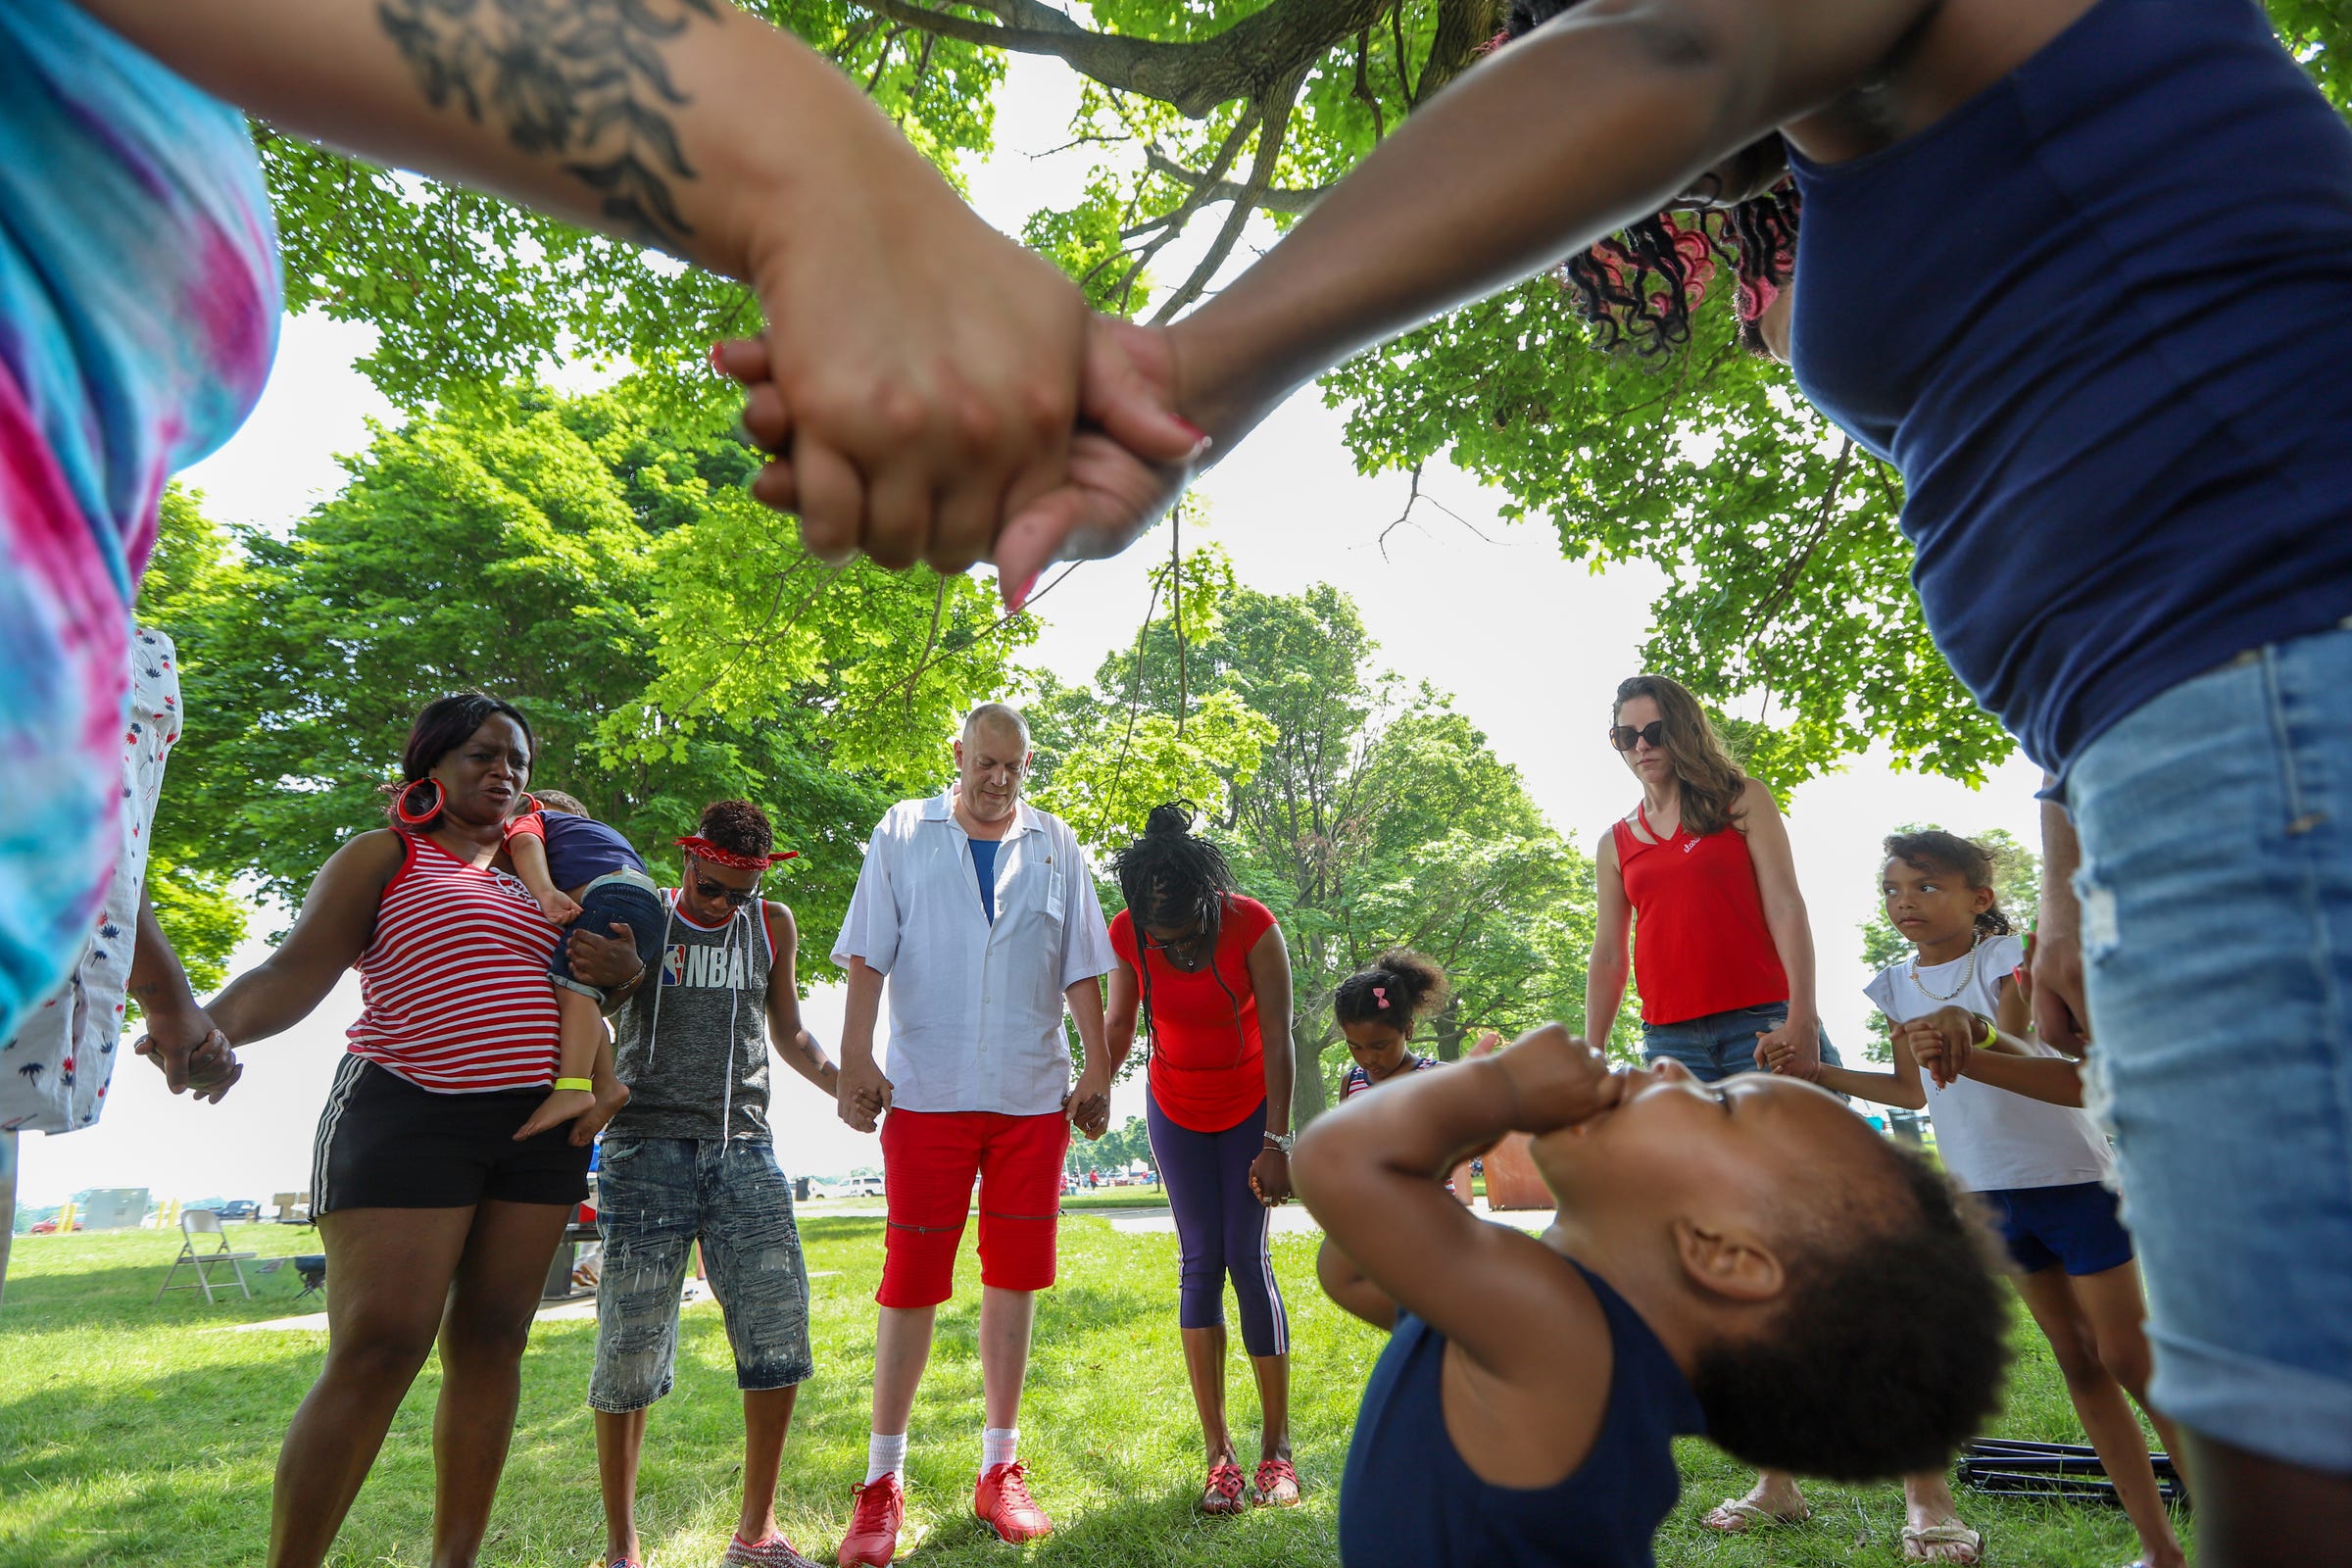 Family members gather to pray before they eat lunch during the Cushingberry family reunion at Belle Isle in Detroit on July 6, 2019. Over 200 hundred members are expected as each immediate family spreads out over a section of the park.